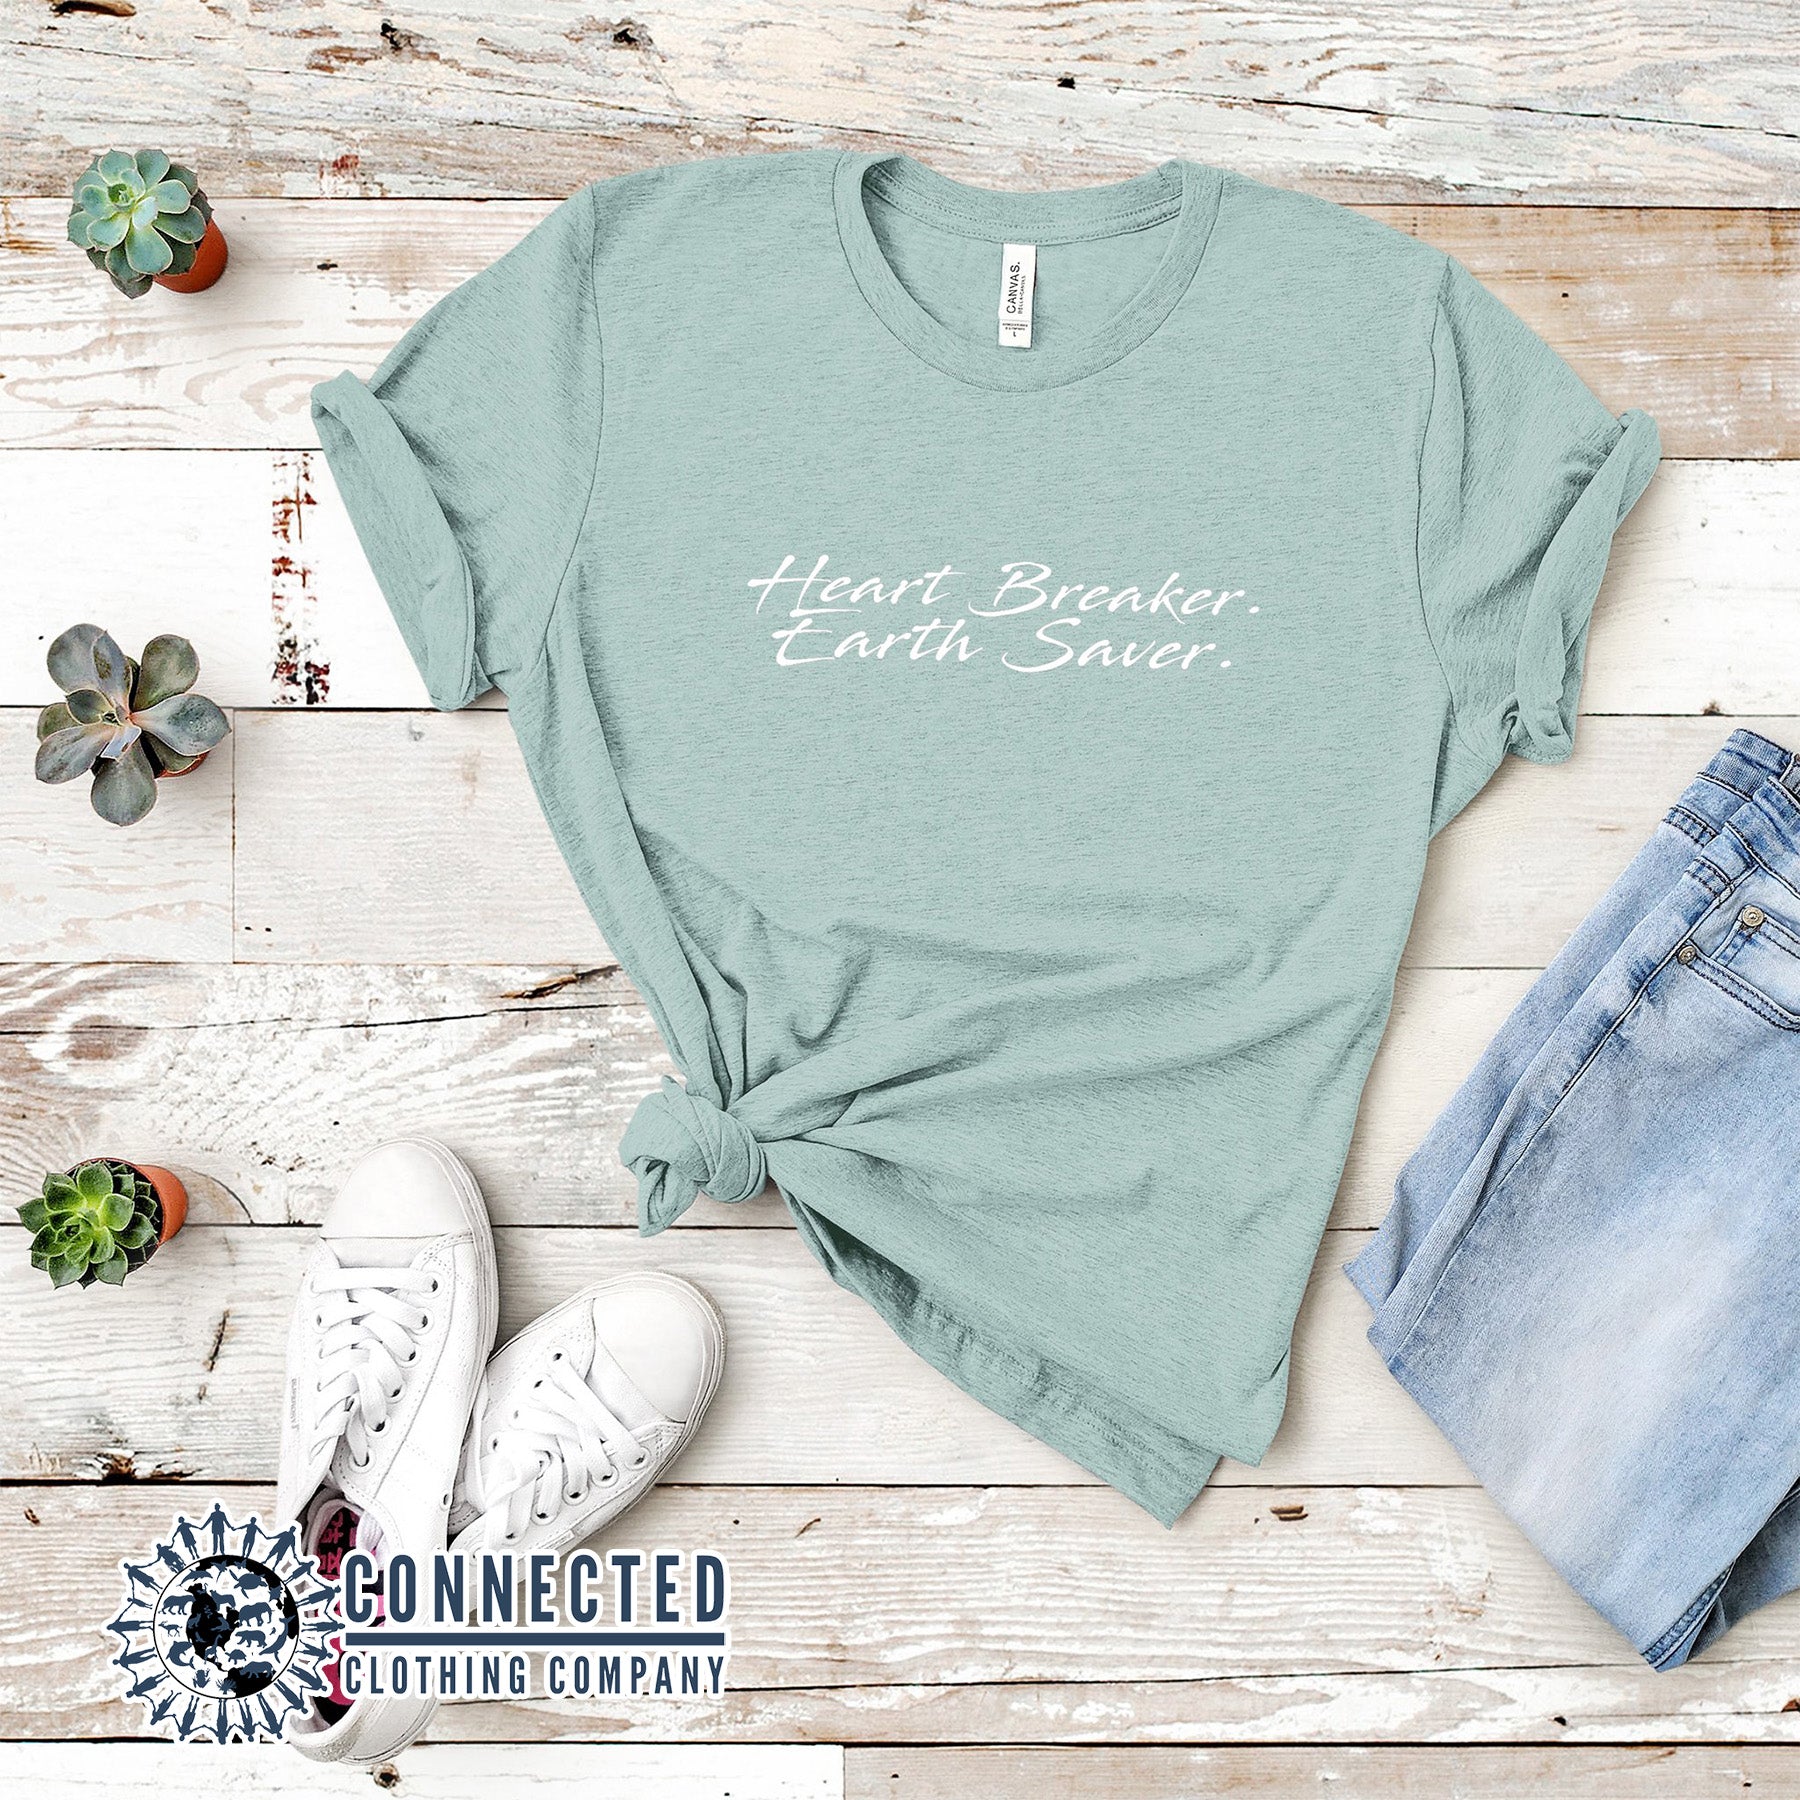 Heather Prism Dusty Blue Heart Breaker. Earth Saver. Short-Sleeve Tee - sweetsherriloudesigns - Ethically and Sustainably Made - 10% of profits donated to ocean conservation